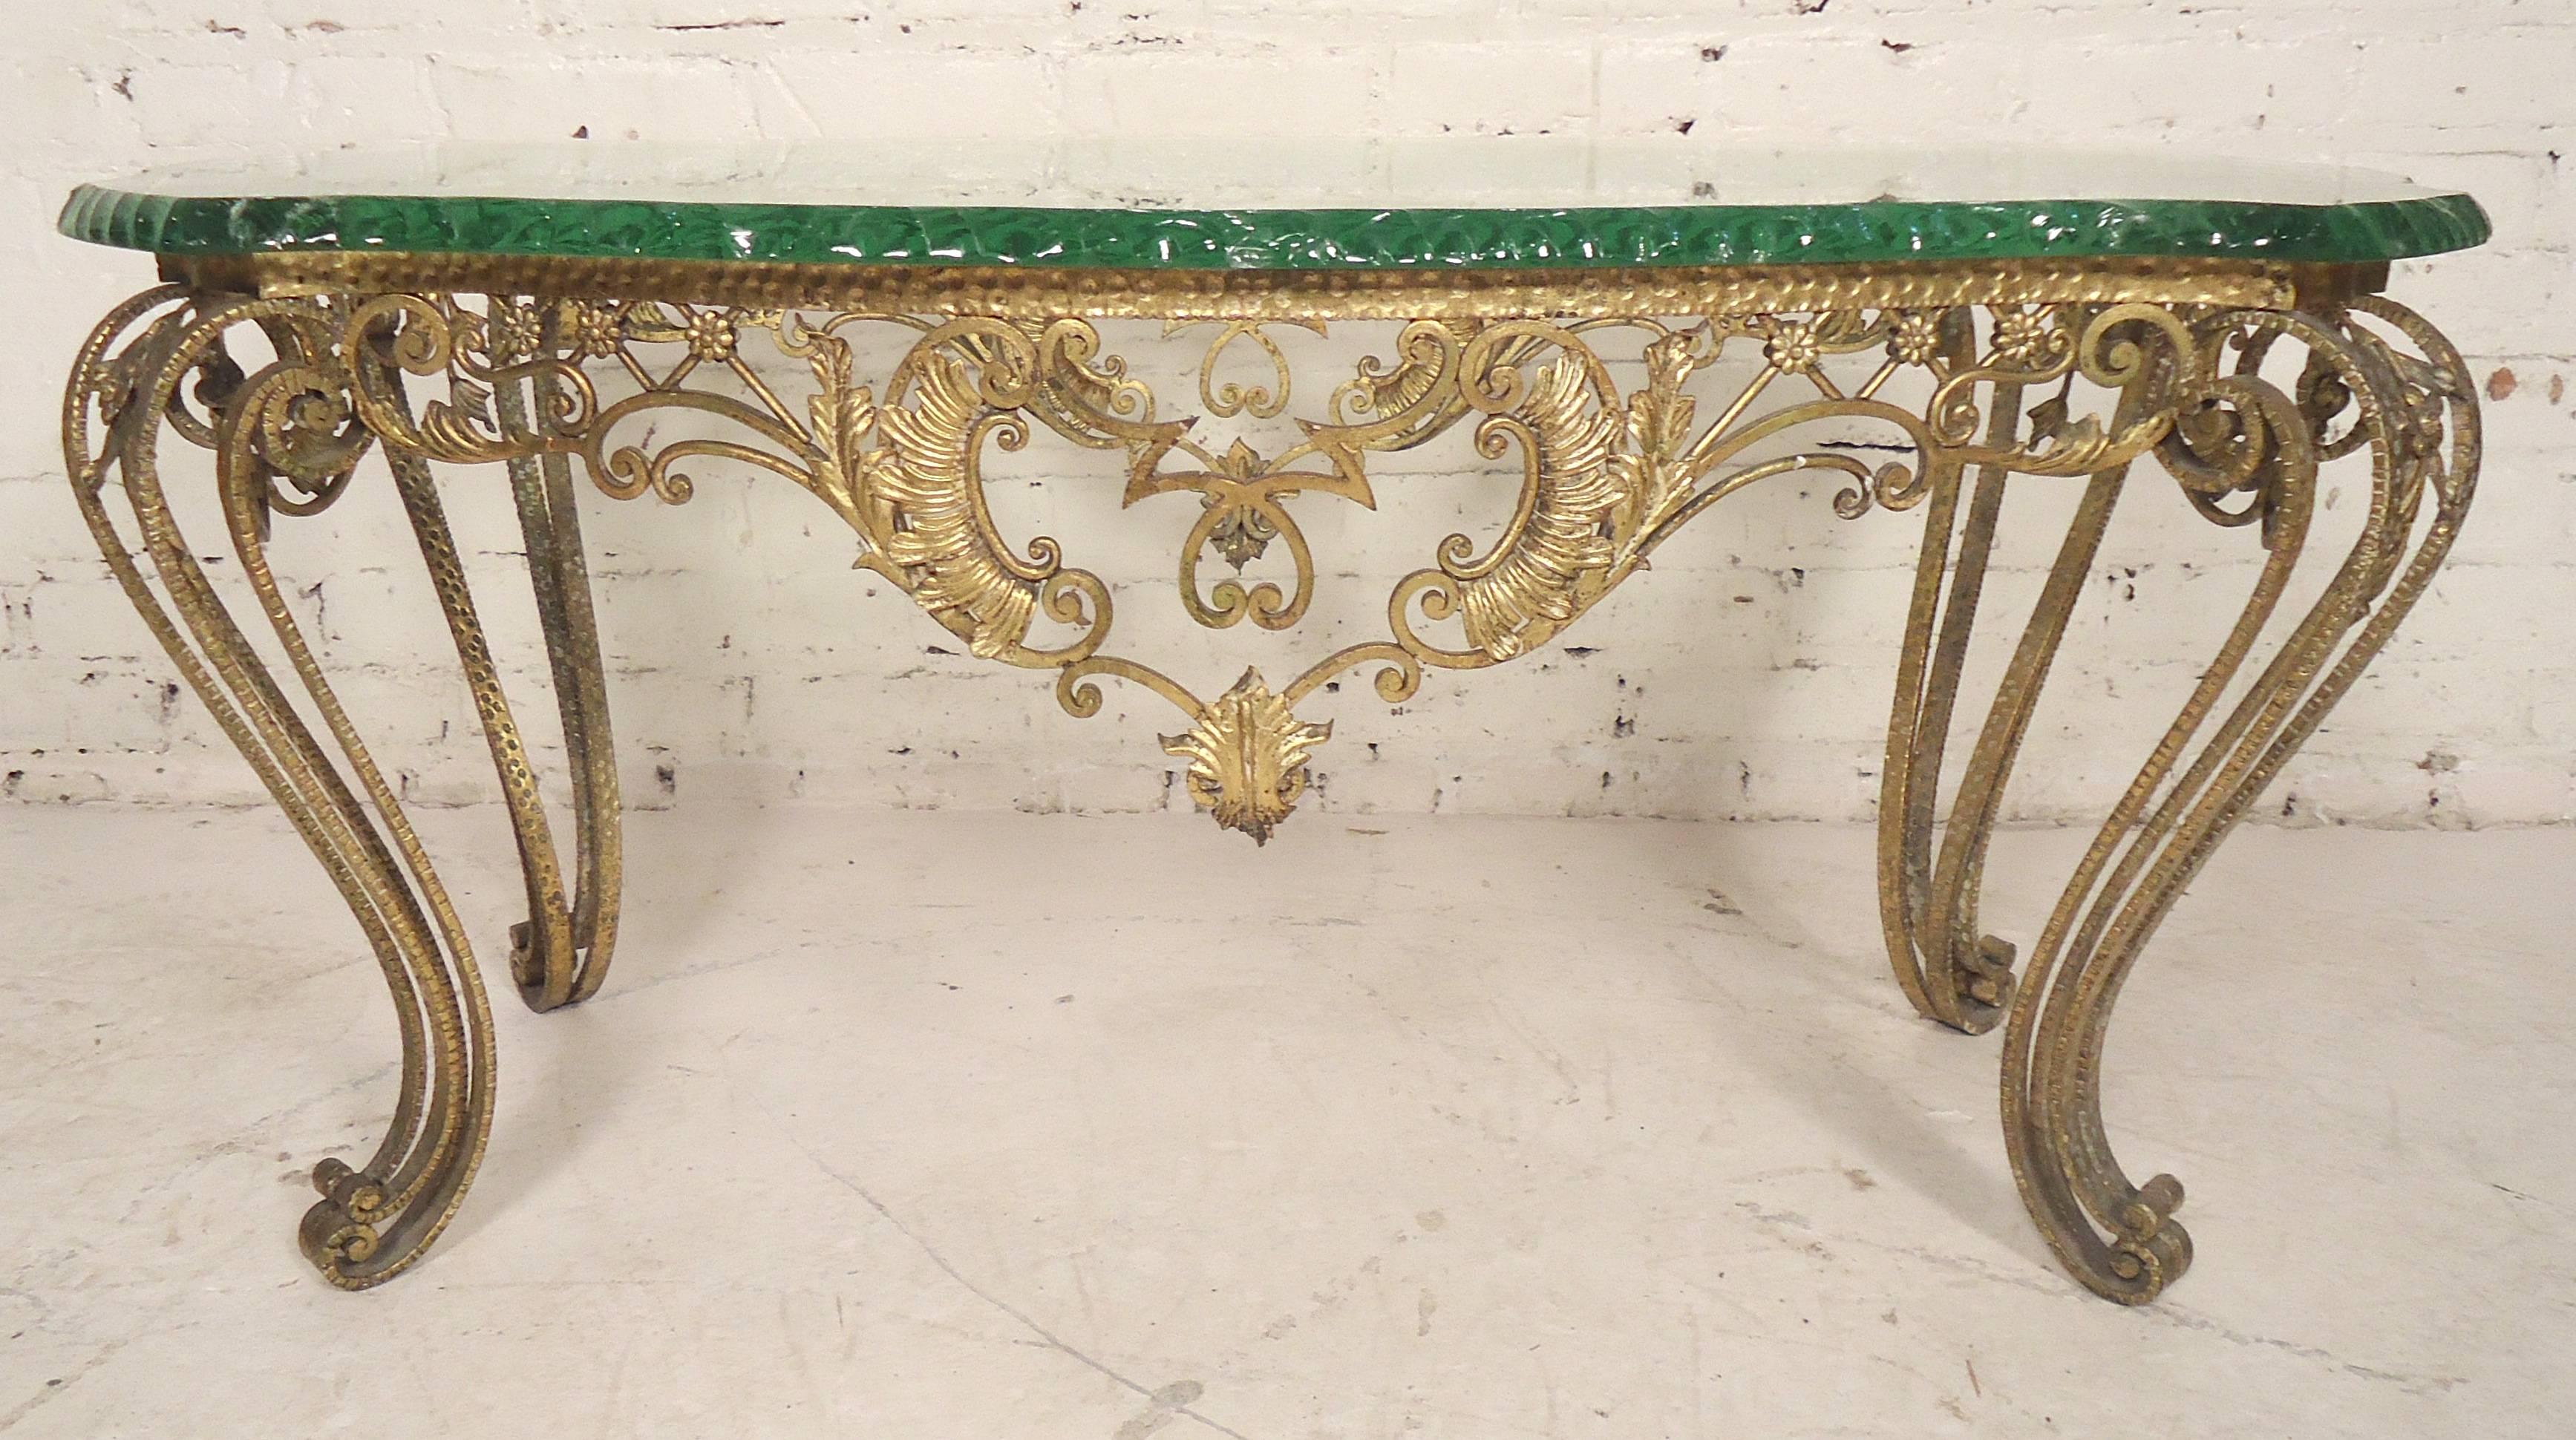 Beautiful Italian table made of hammered bronze with a thick chiselled glass top. Unique decorative flair on base with scrolling legs.

(Please confirm item location - NY or NJ - with dealer).
 